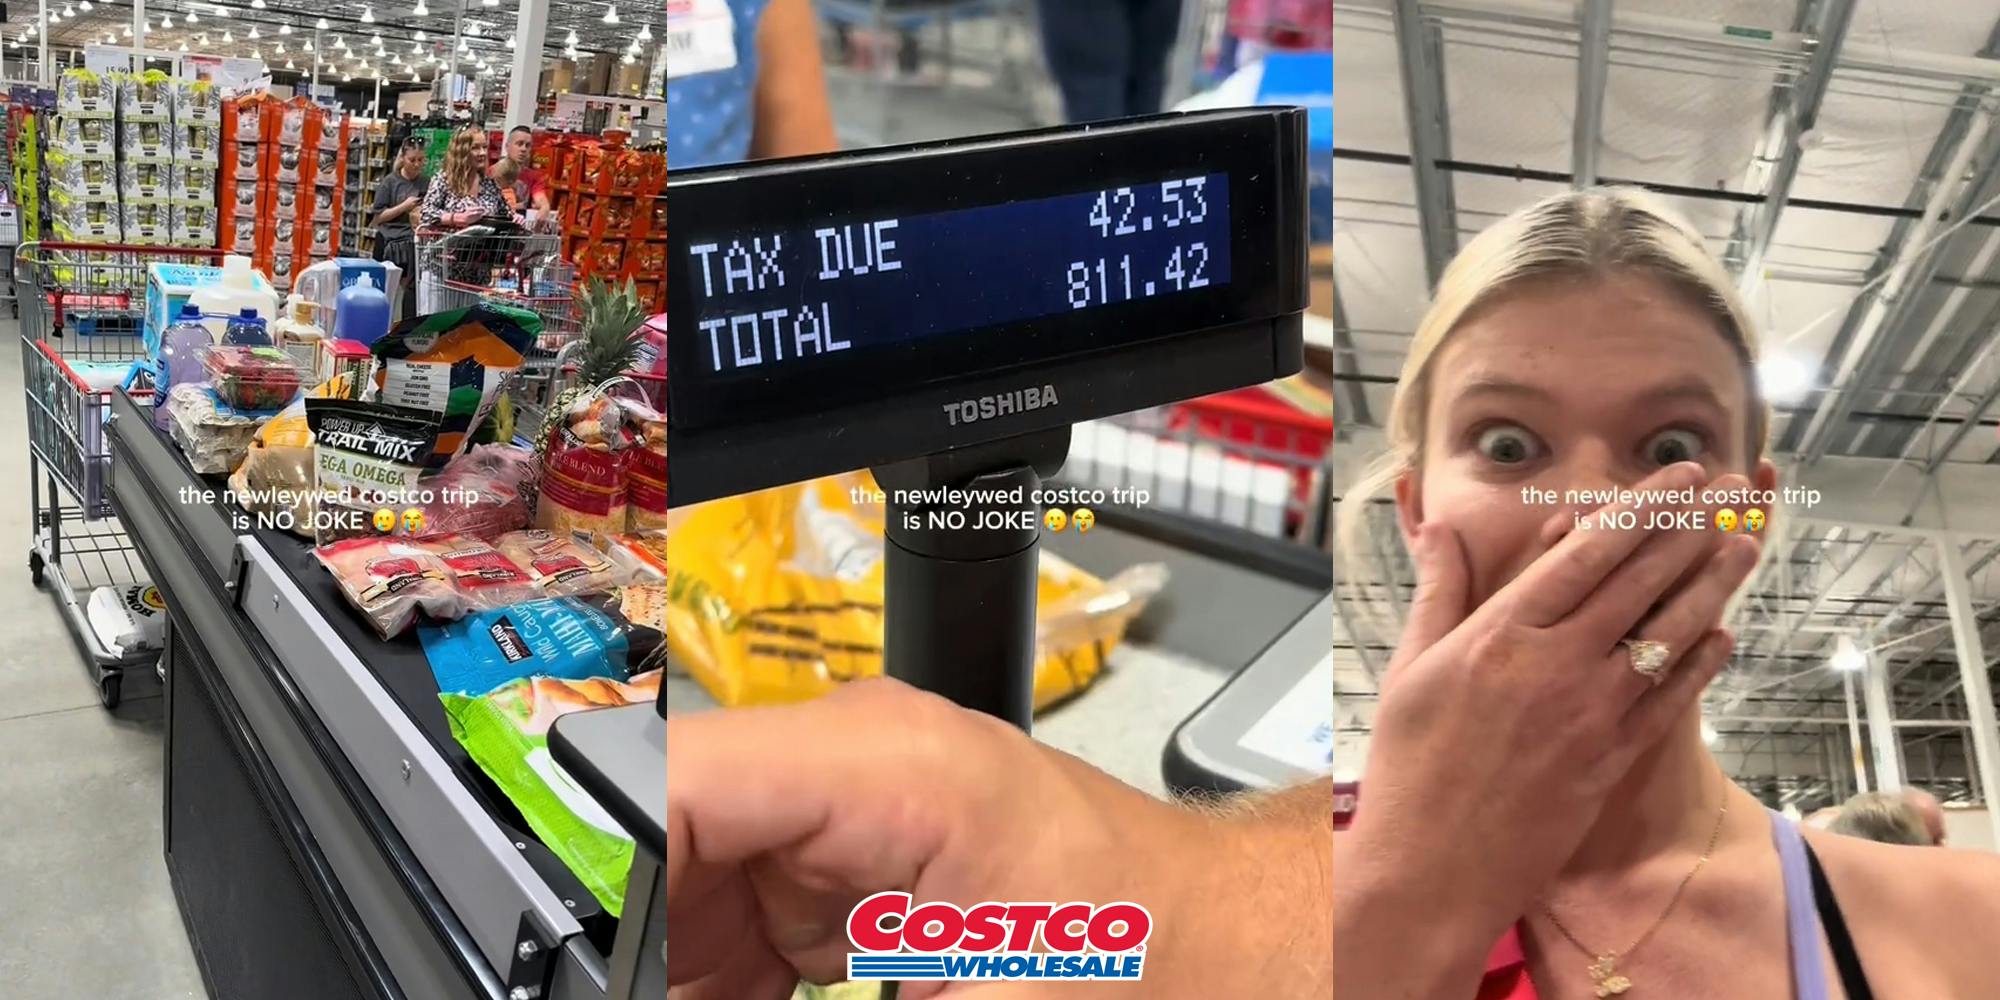 Costco checkout conveyer belt full of groceries with caption "the newlywed costco trip is NO JOKE" (l) Costco checkout displaying "TOTAL $811.42" with Costco logo at bottom (c) Costco customer with hand over mouth with caption "the newlywed costco trip is NO JOKE" (r)